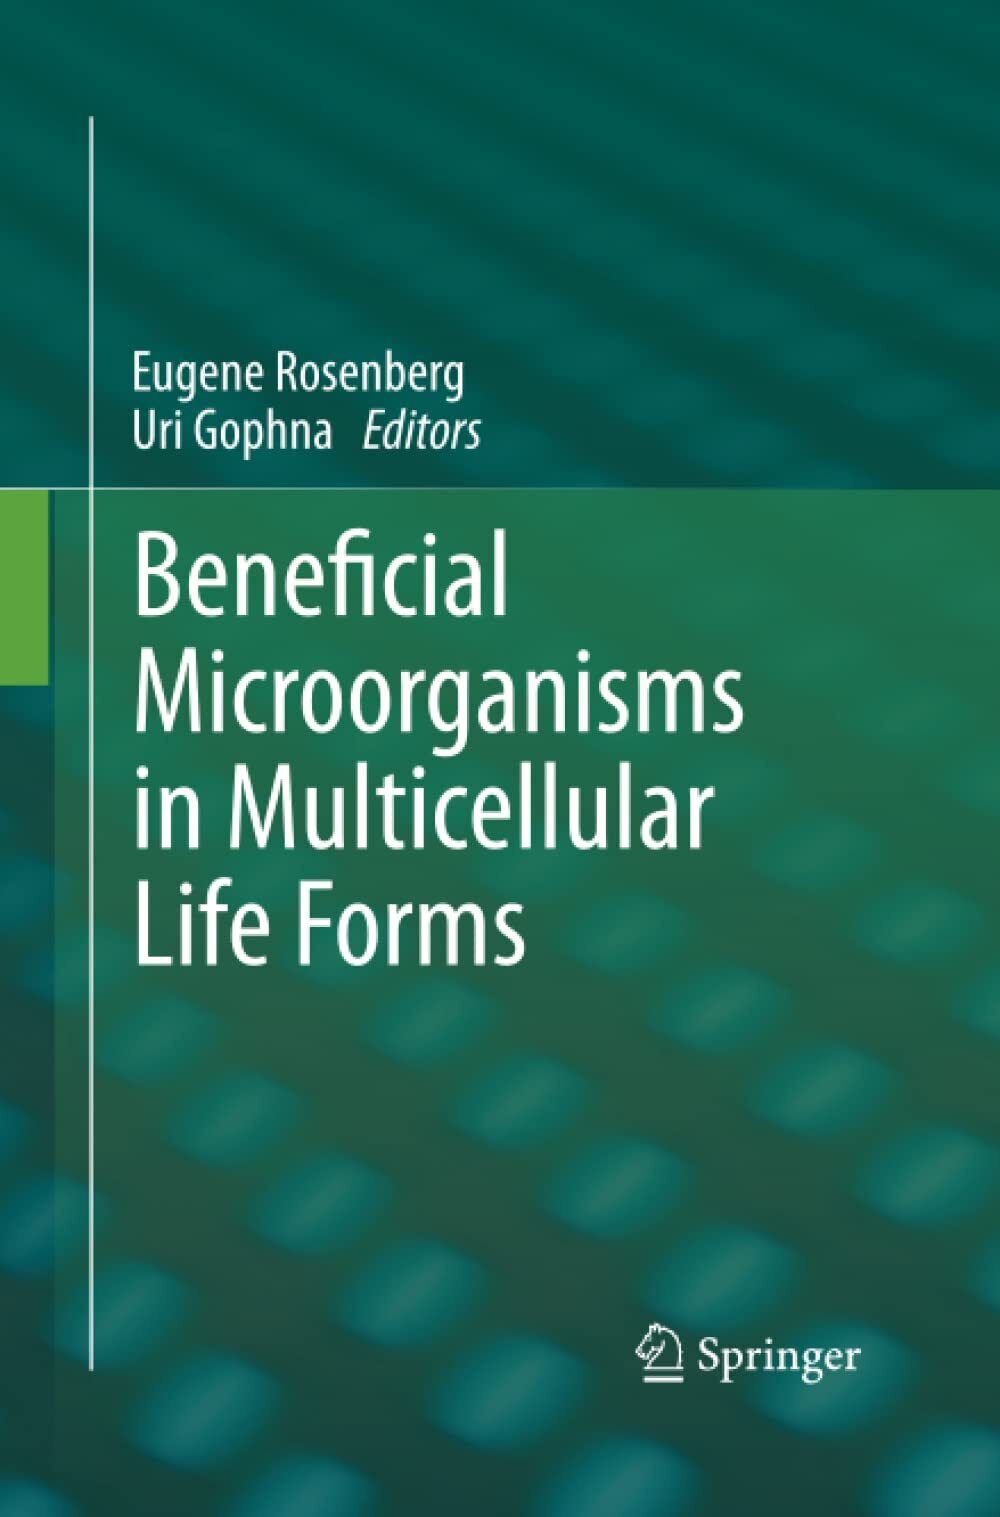 Beneficial Microorganisms in Multicellular Life Forms - Eugene Rosenberg - 2014